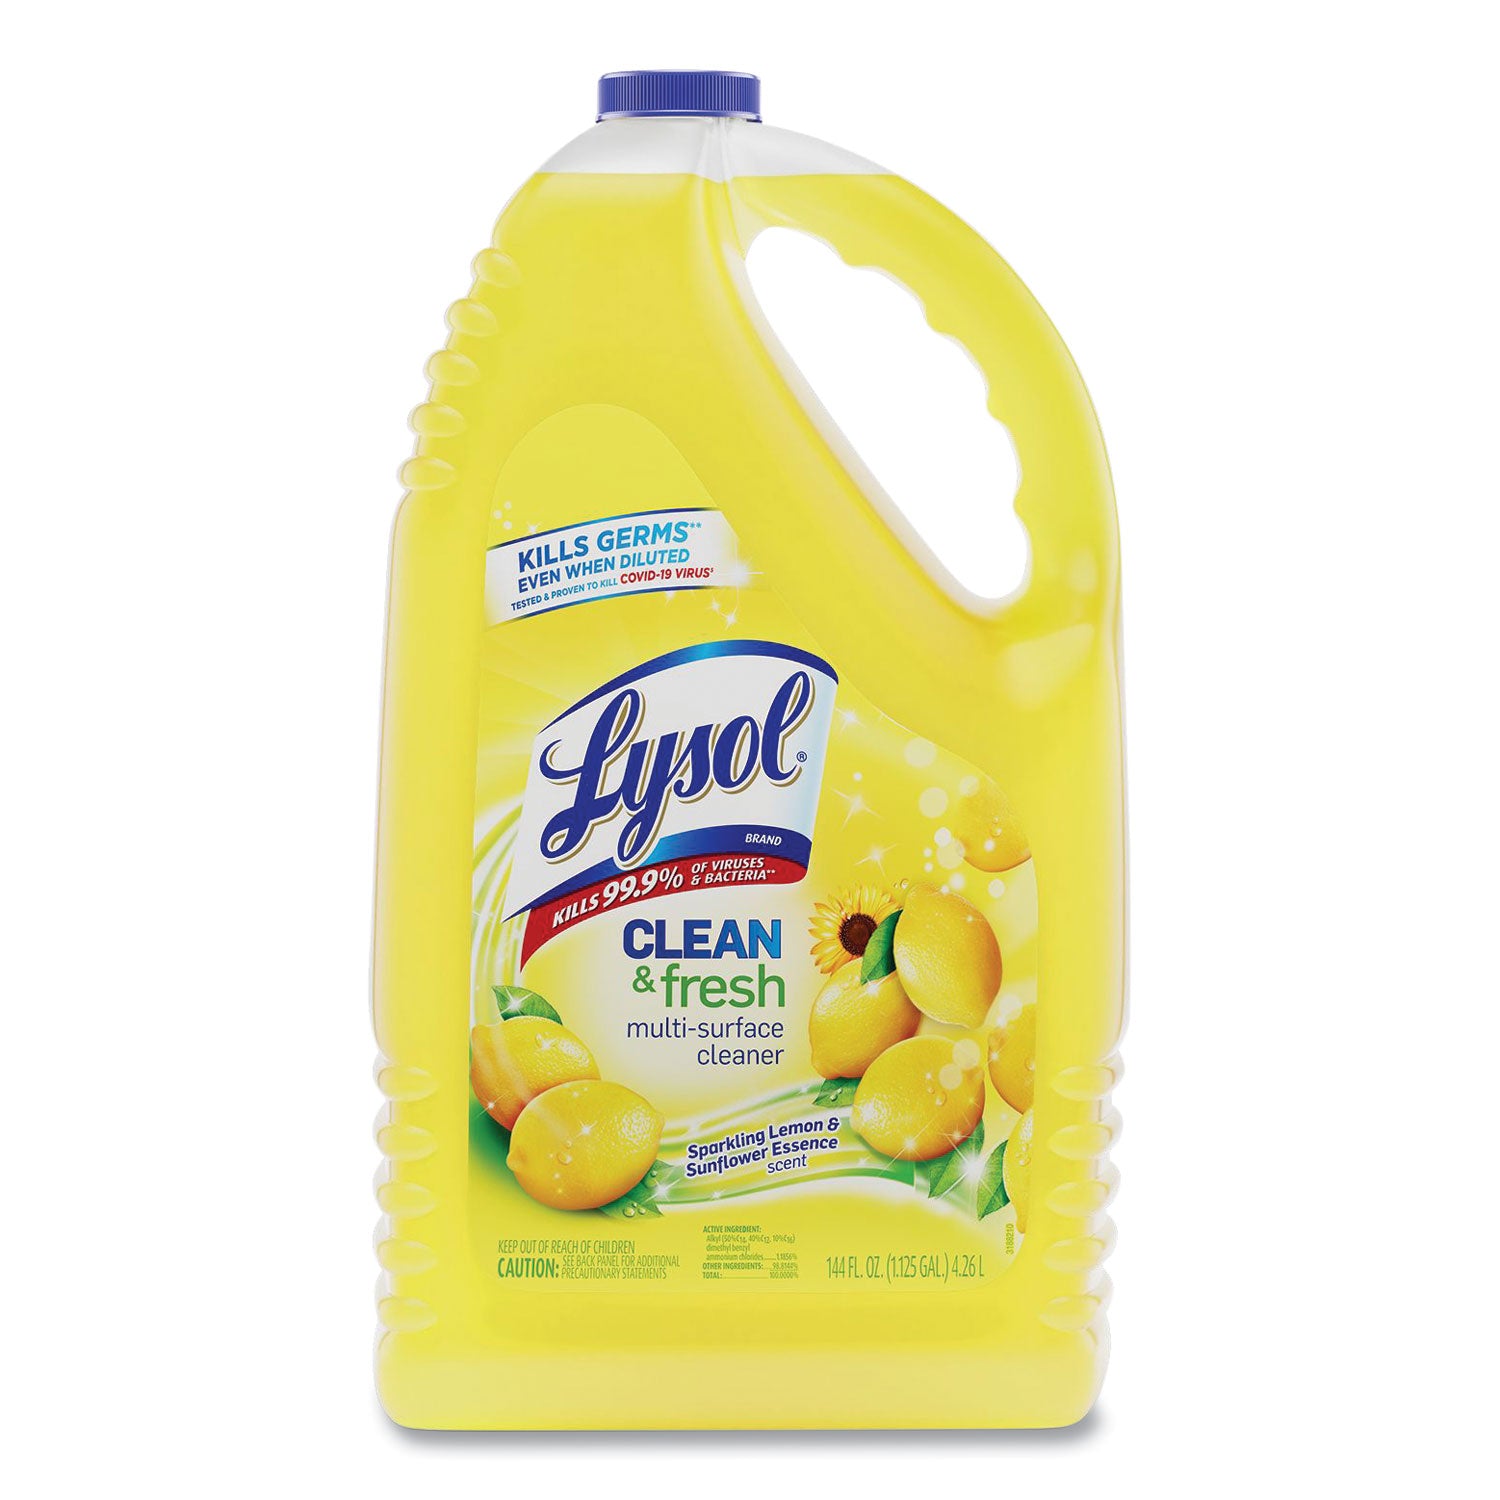 clean-and-fresh-multi-surface-cleaner-sparkling-lemon-and-sunflower-essence-144-oz-bottle_rac77617ea - 1